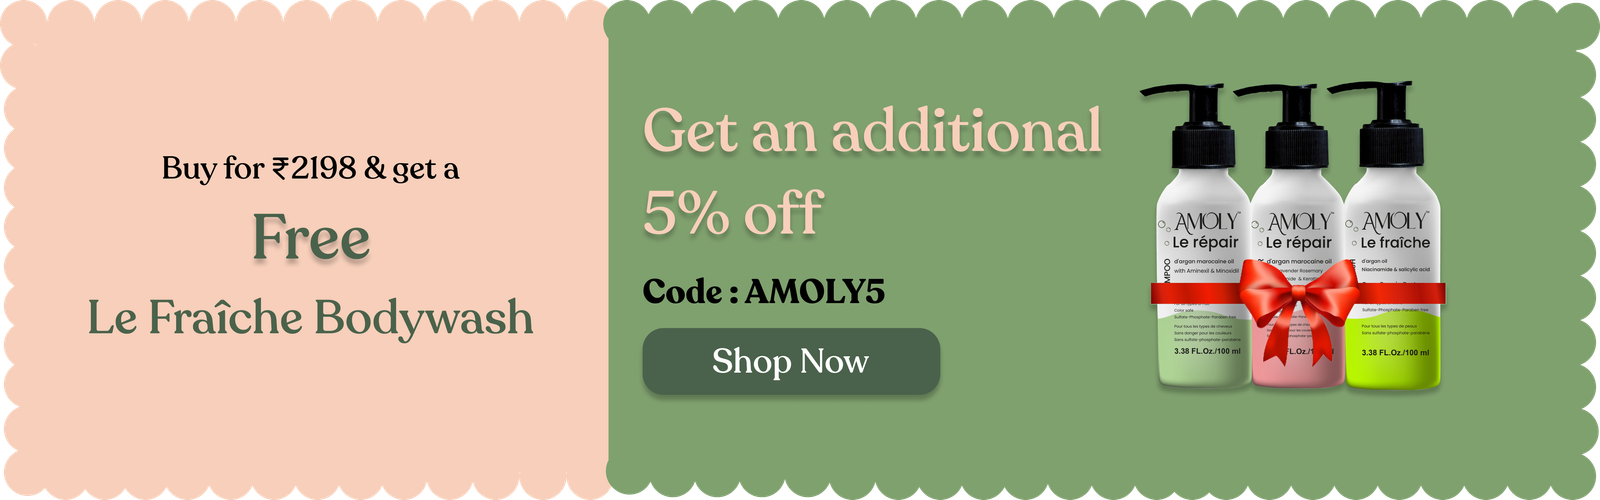 Amoly Offer